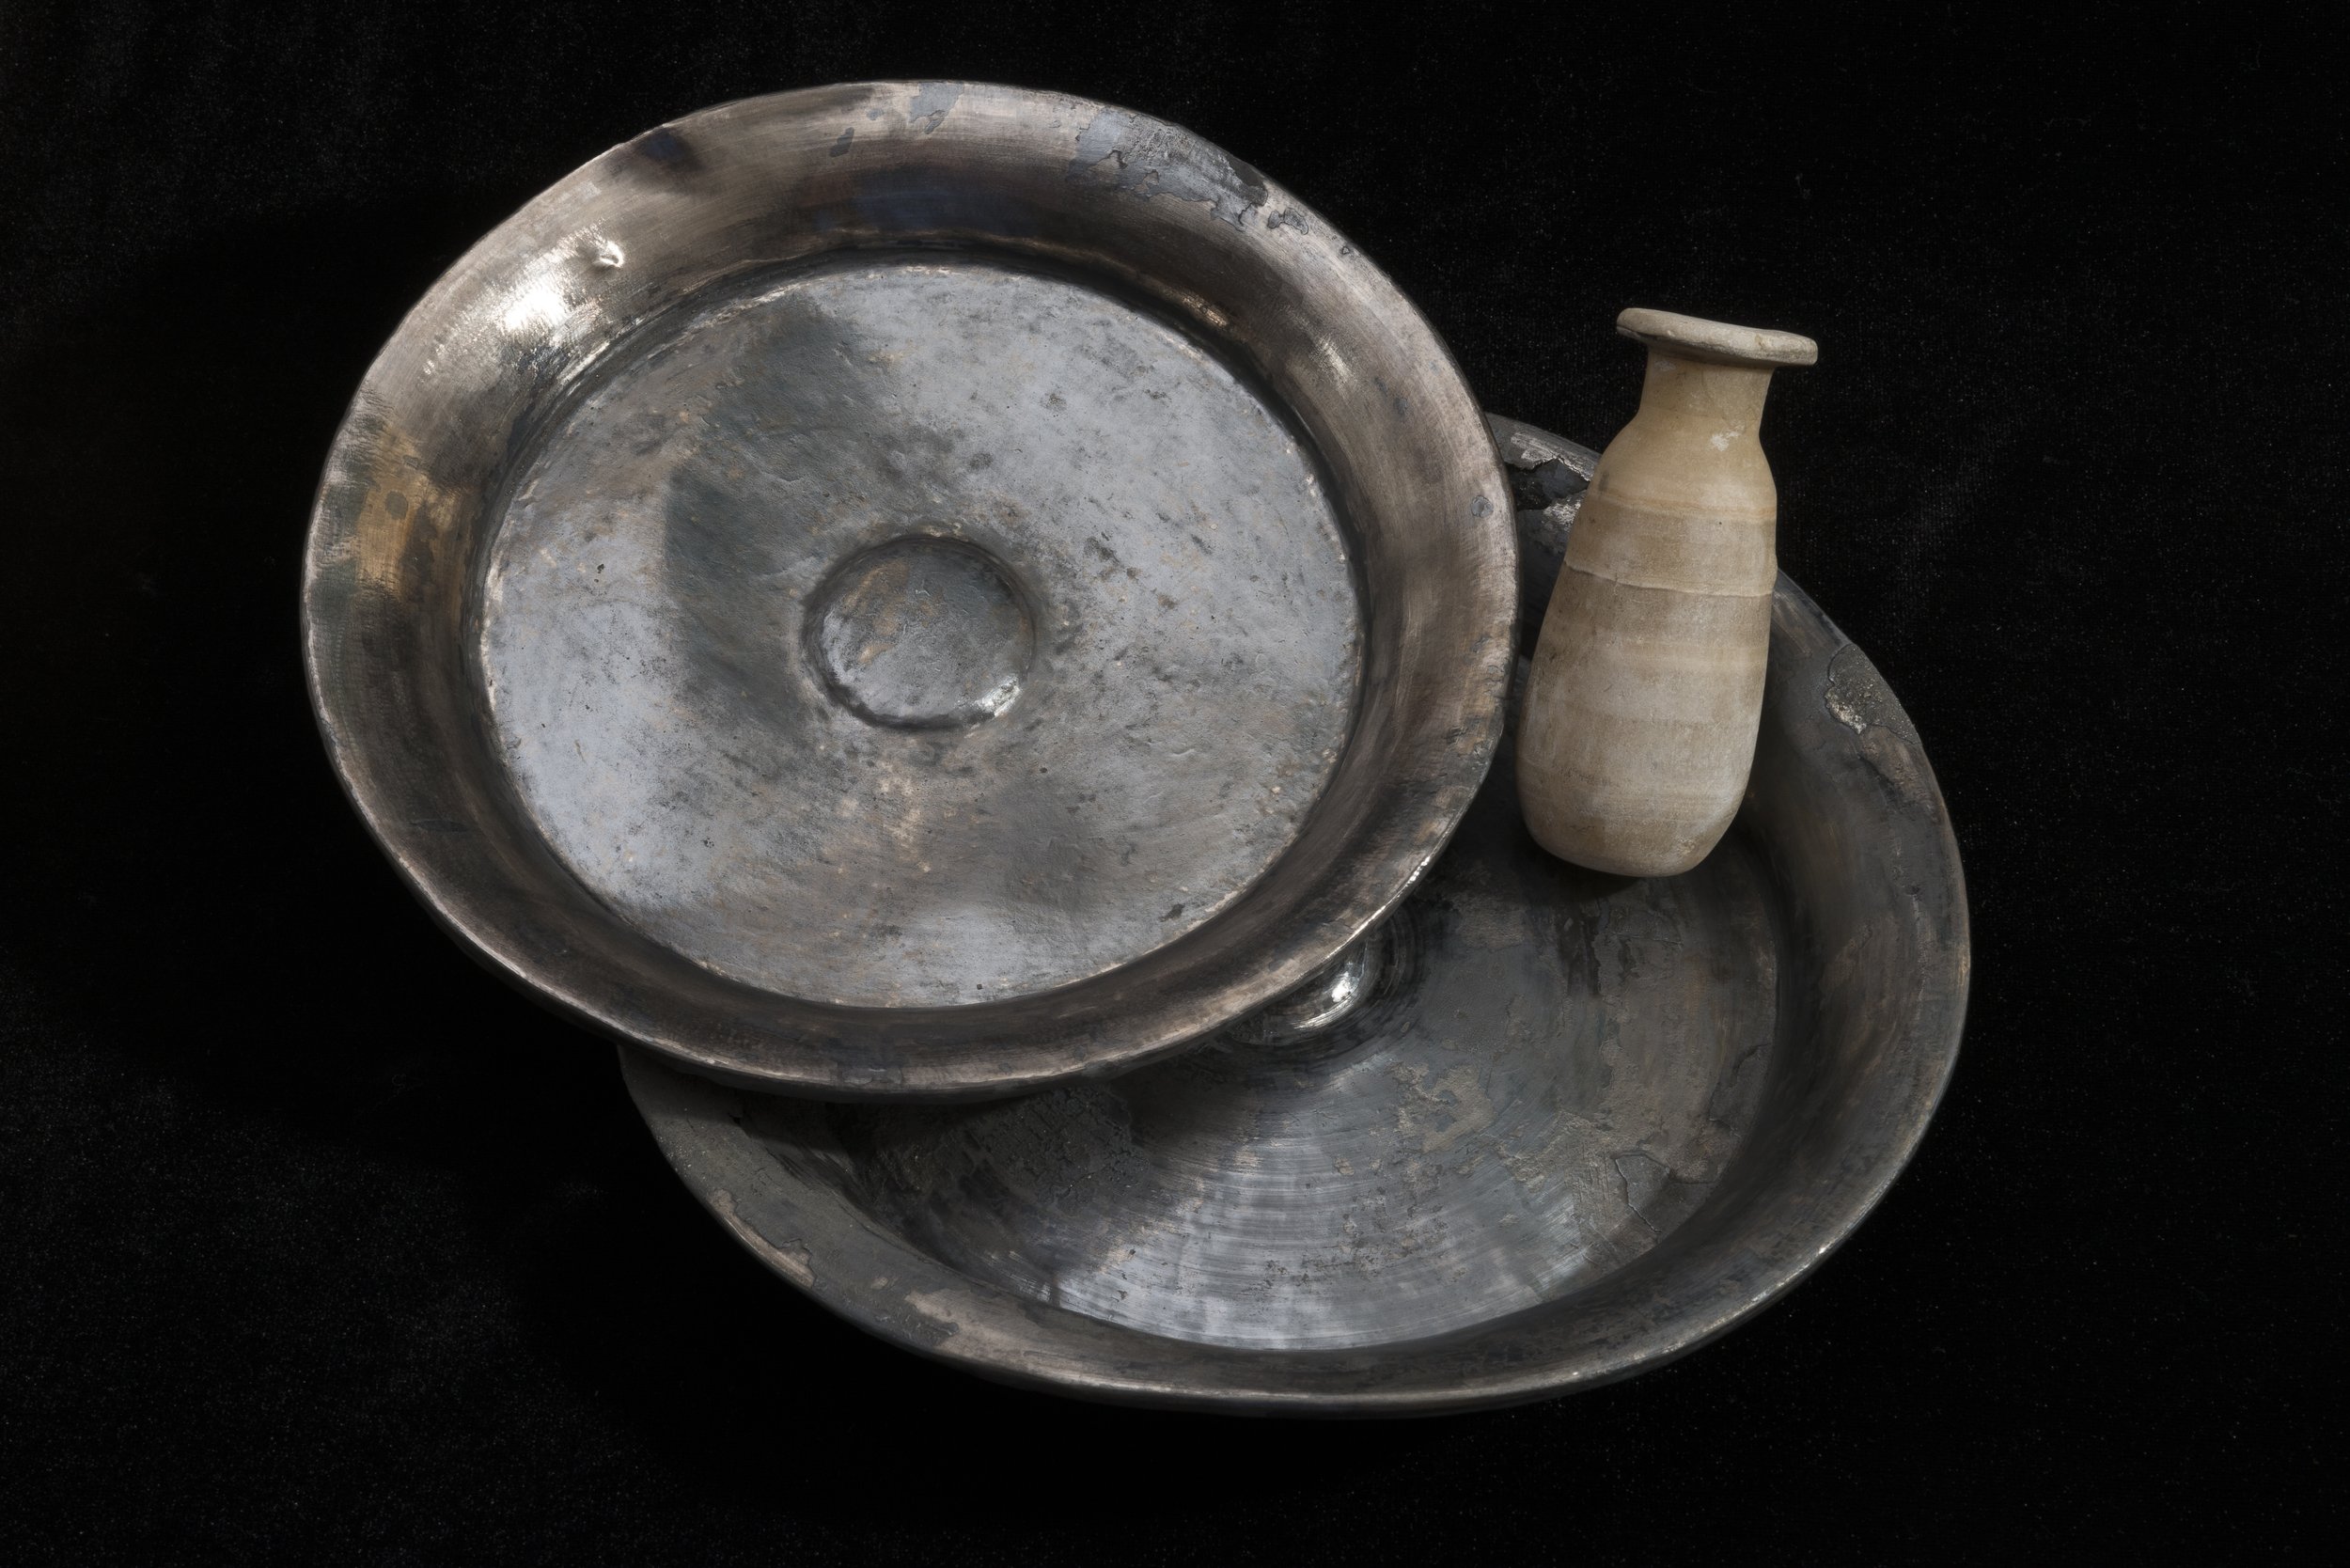  Two silver ritual dishes for libations for the gods from the temple treasure. Silver was considered extremely precious in ancient Egypt. An alabaster container for unguents and perfumes was found amongst them. Thonis-Heracleion, 5th century BC.&nbsp